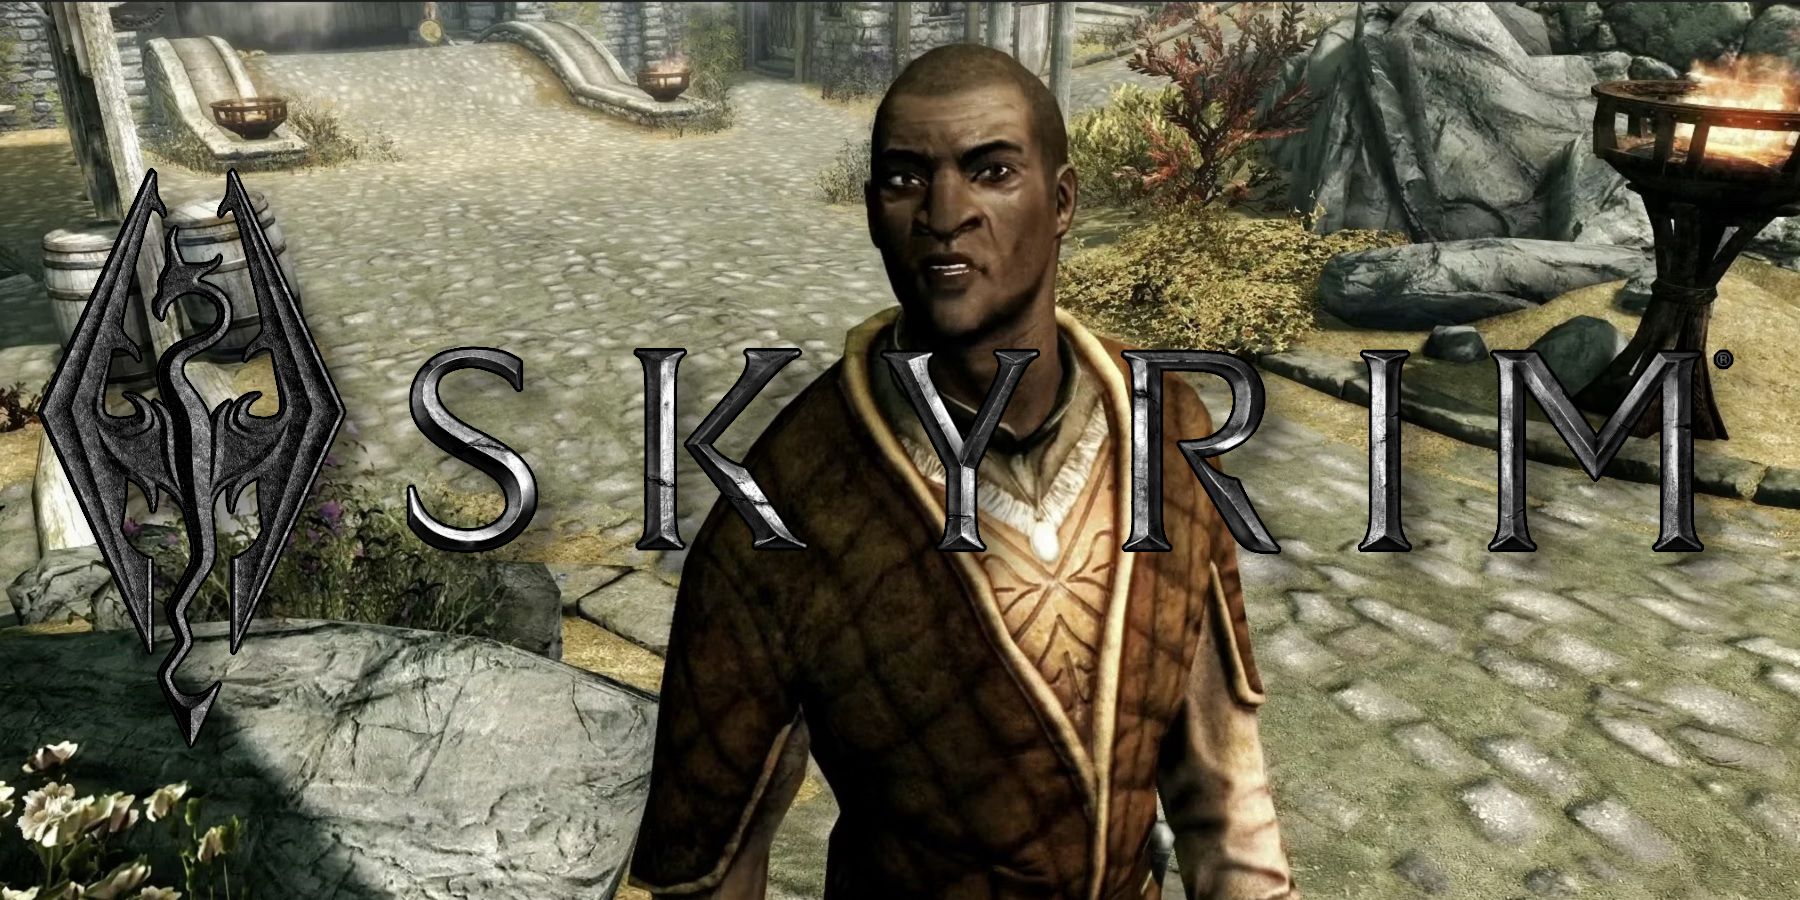 Skyrim Player Finds an Unexpected Use for Nazeem